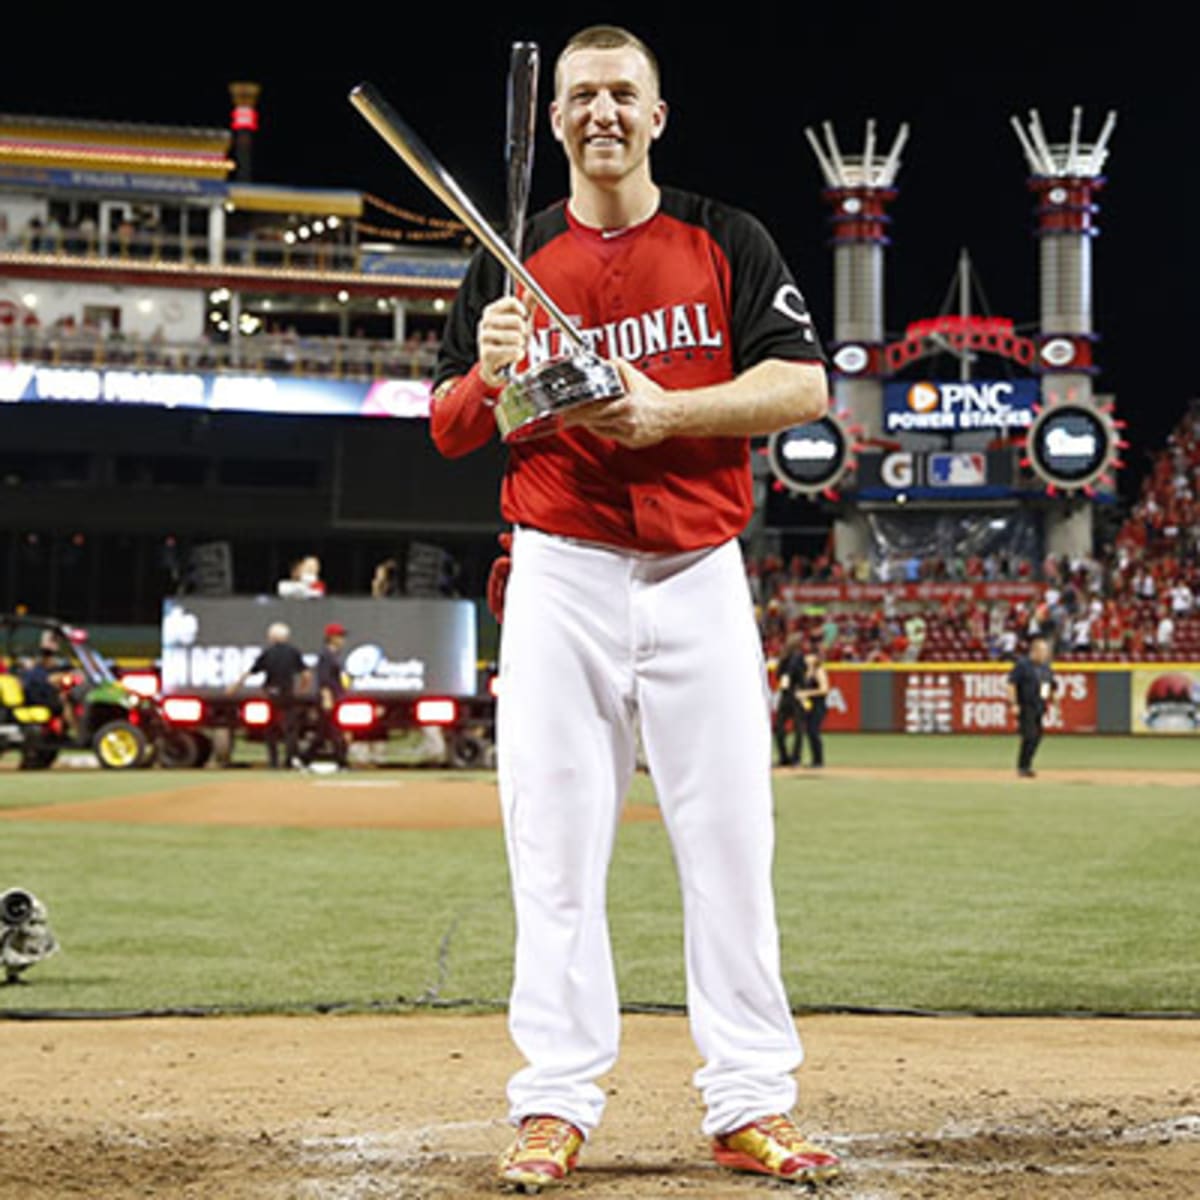 A Legends Home Run Derby at the All-Star Game? Four greats are on